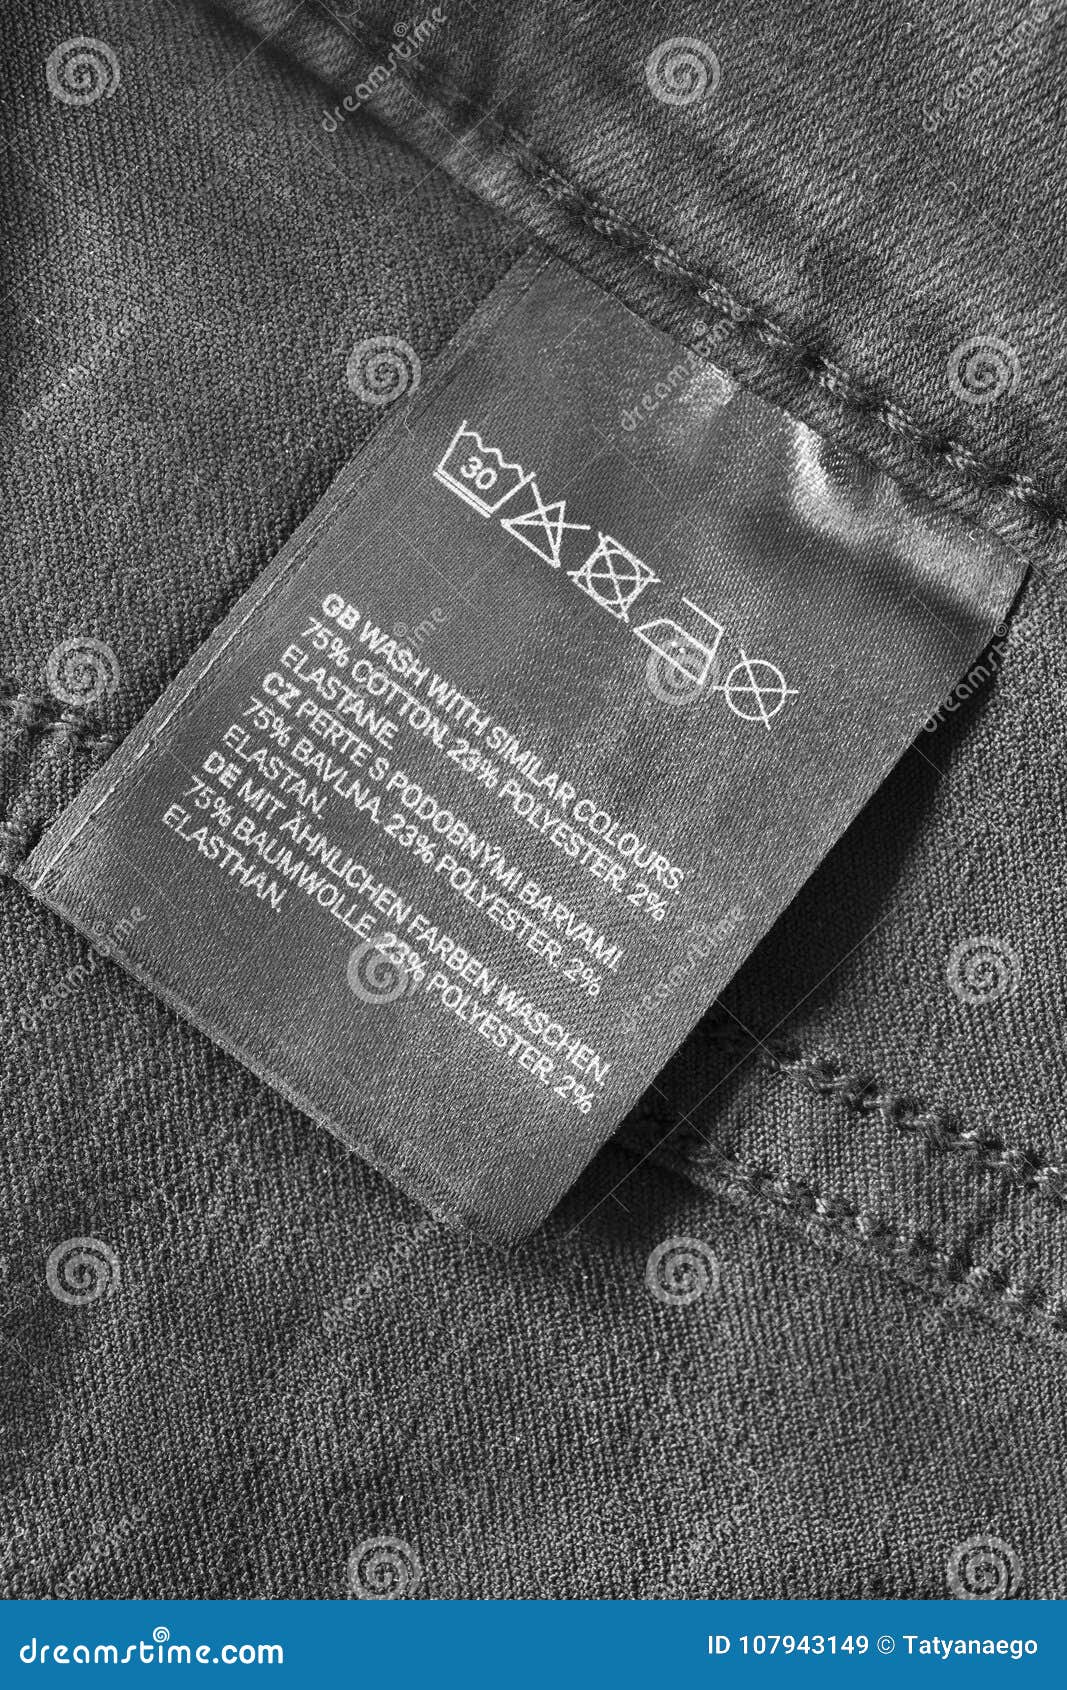 Fabric composition label stock image. Image of label - 107943149